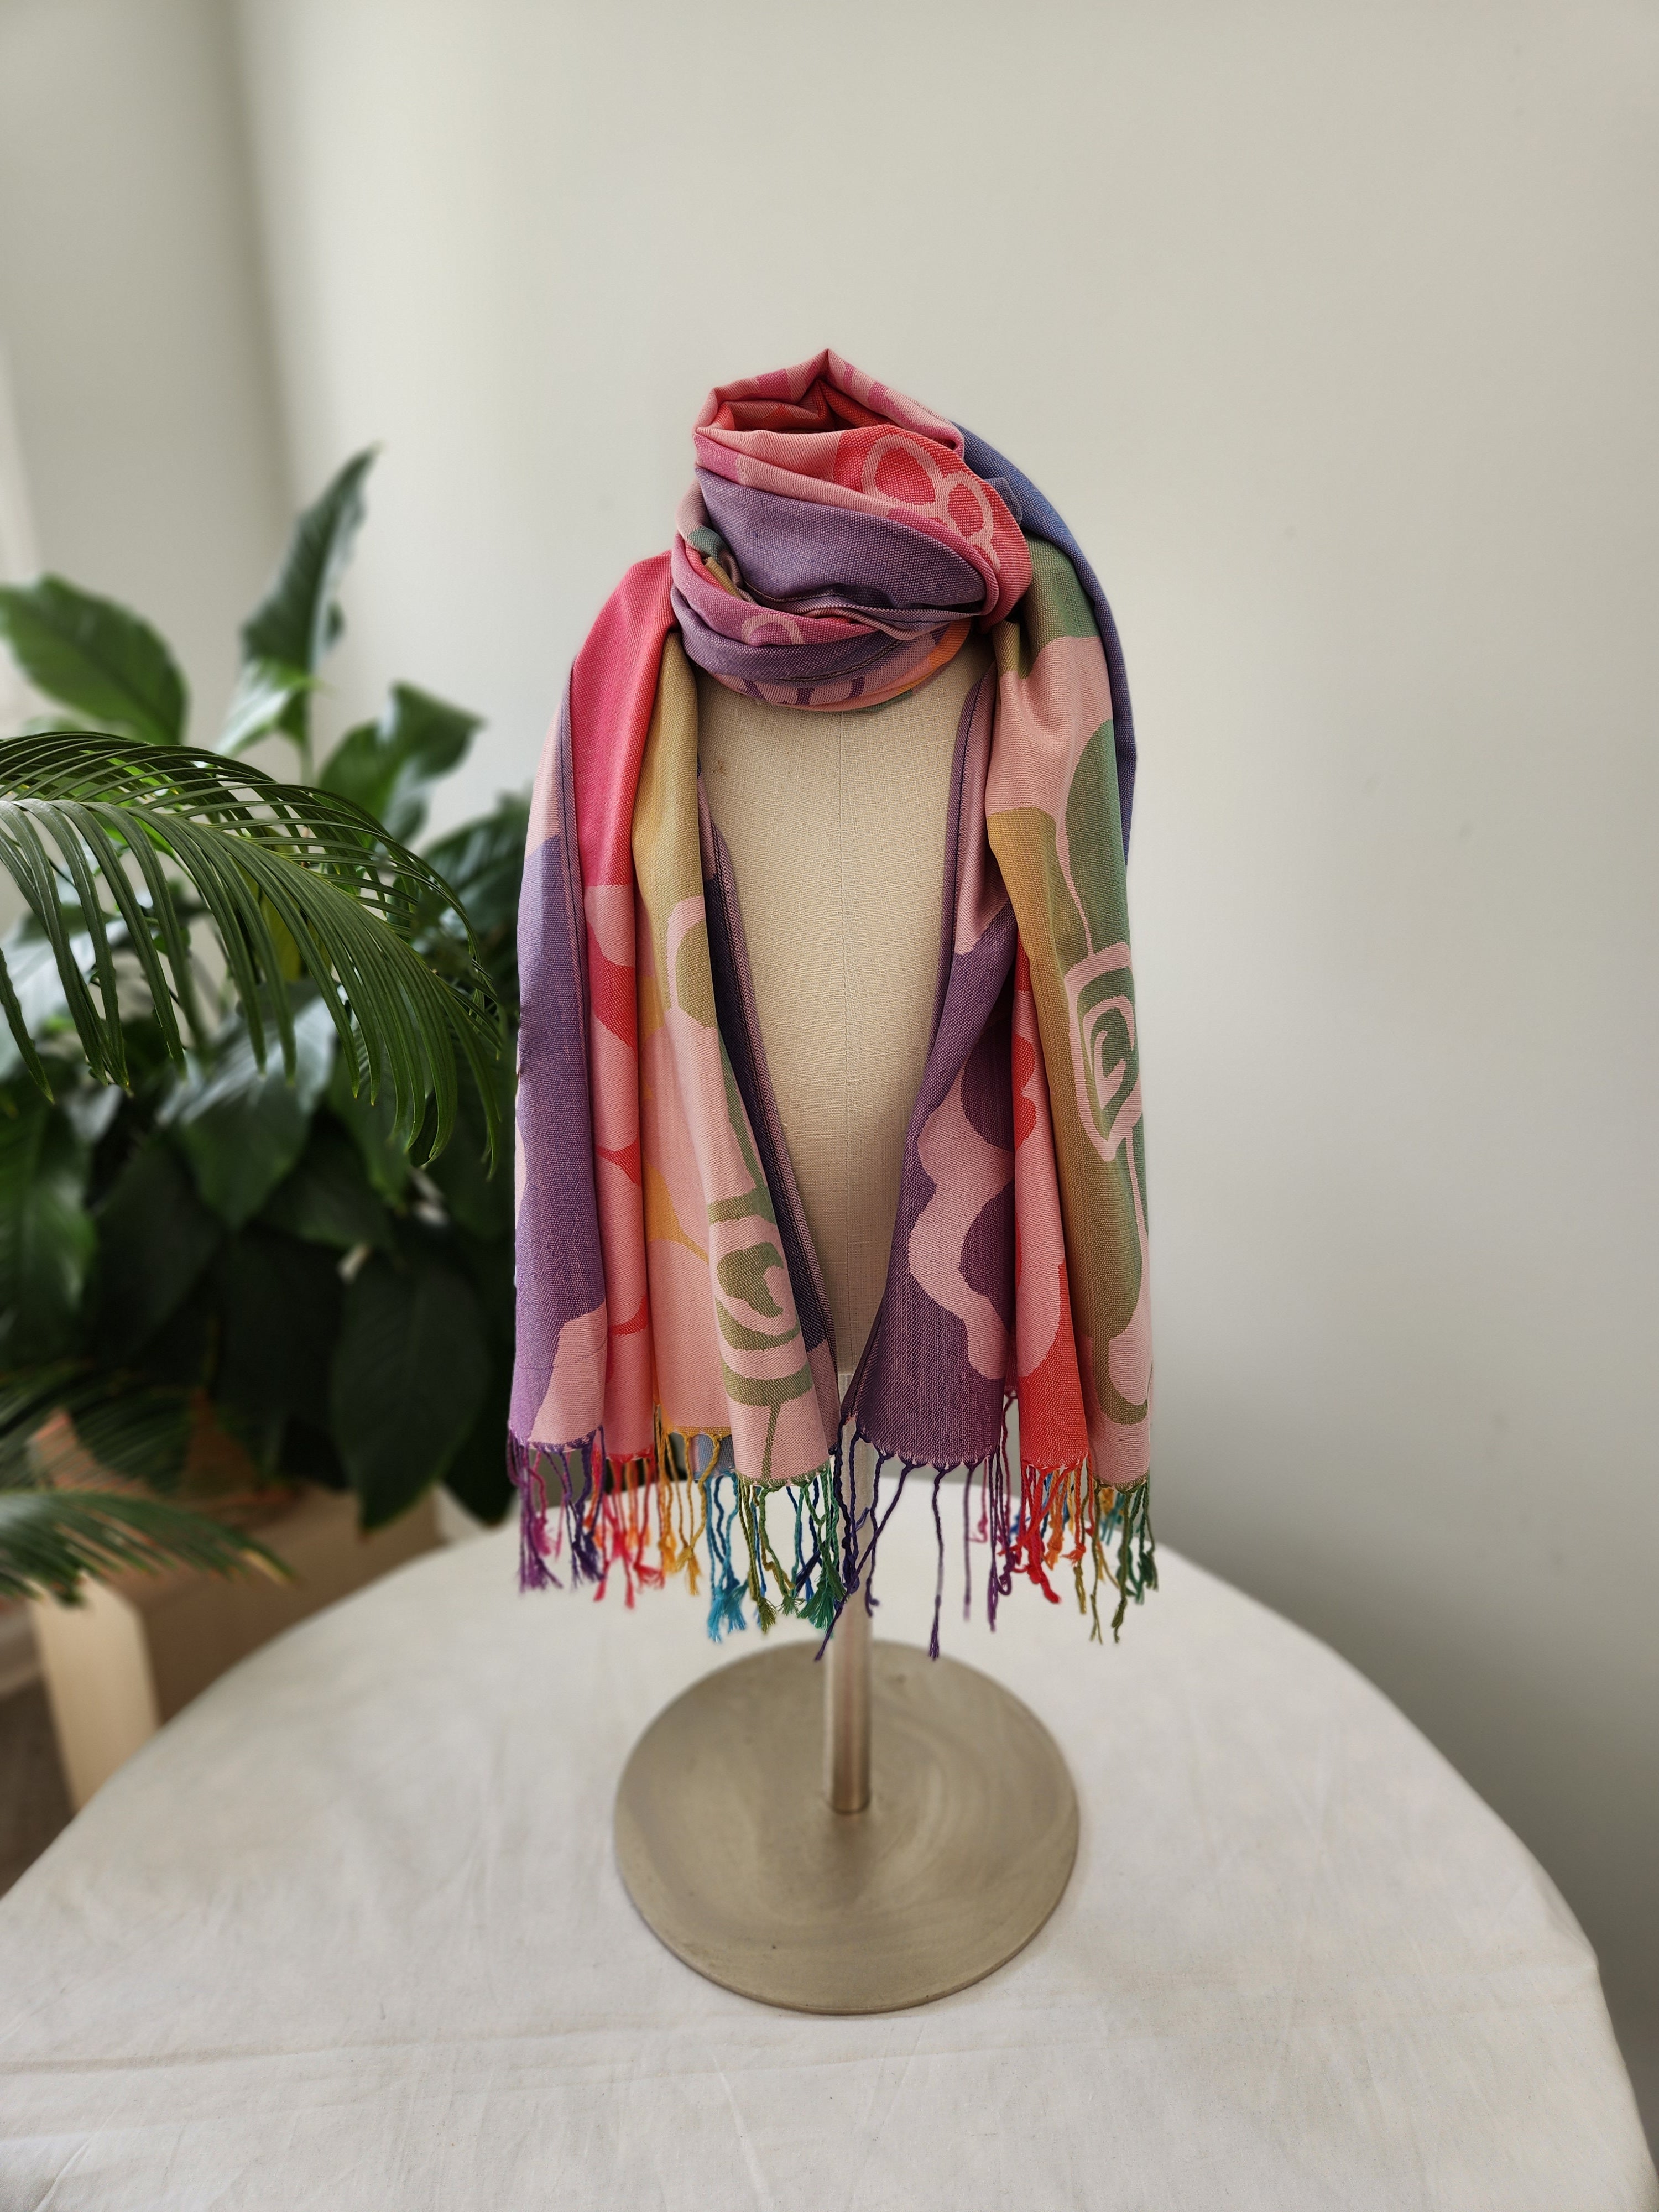 Colorful Women's Scarf in Vibrant, Tropical Colors Makes A Great Holiday Gift - 0